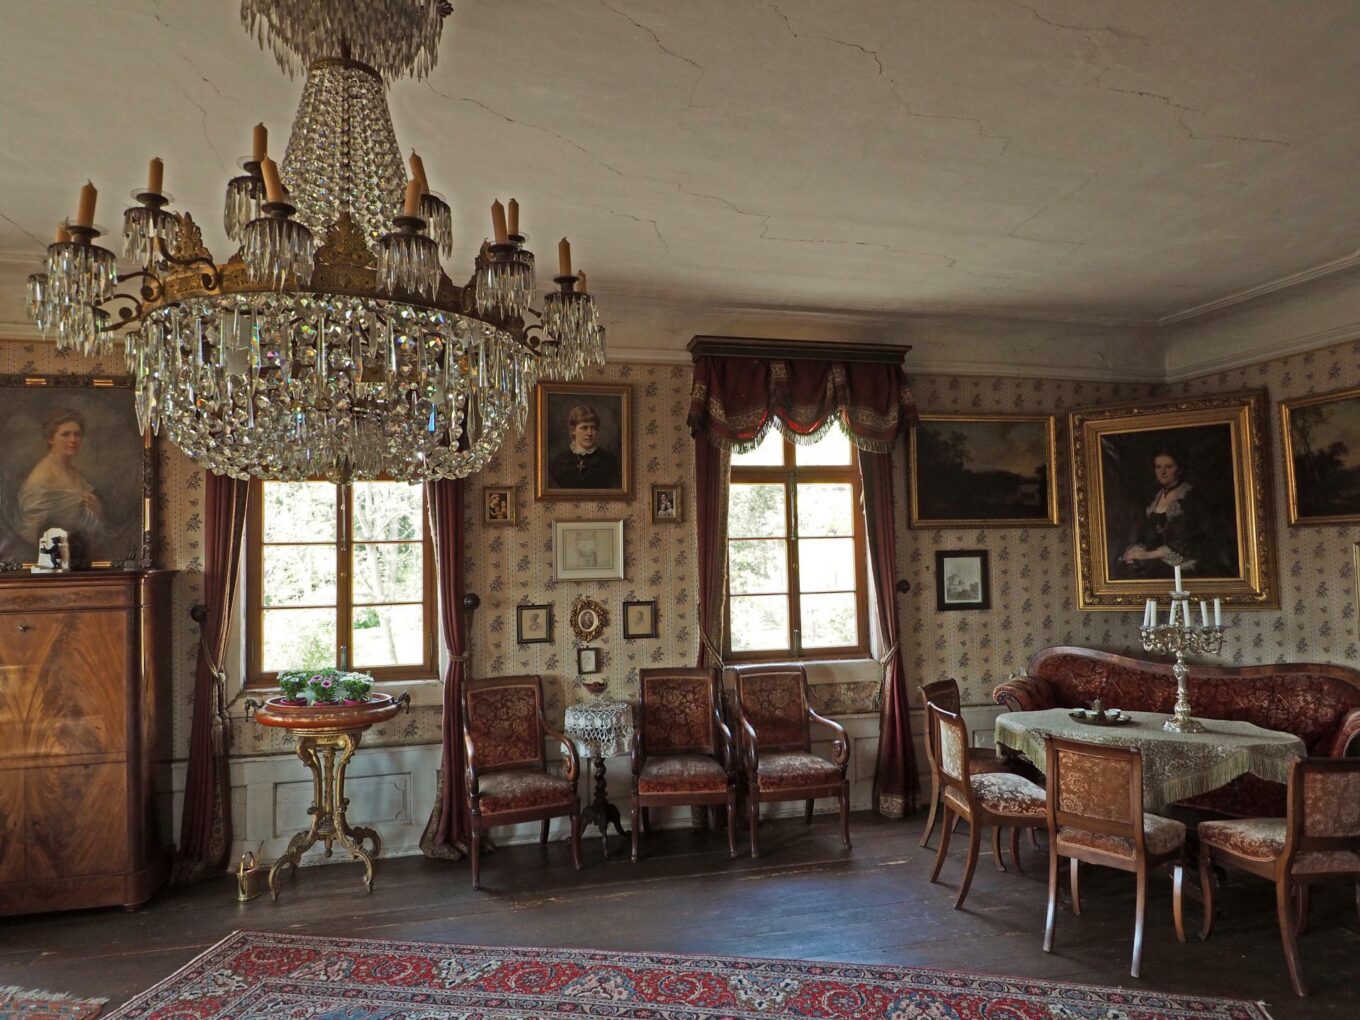 The Grand Salon on the first floor